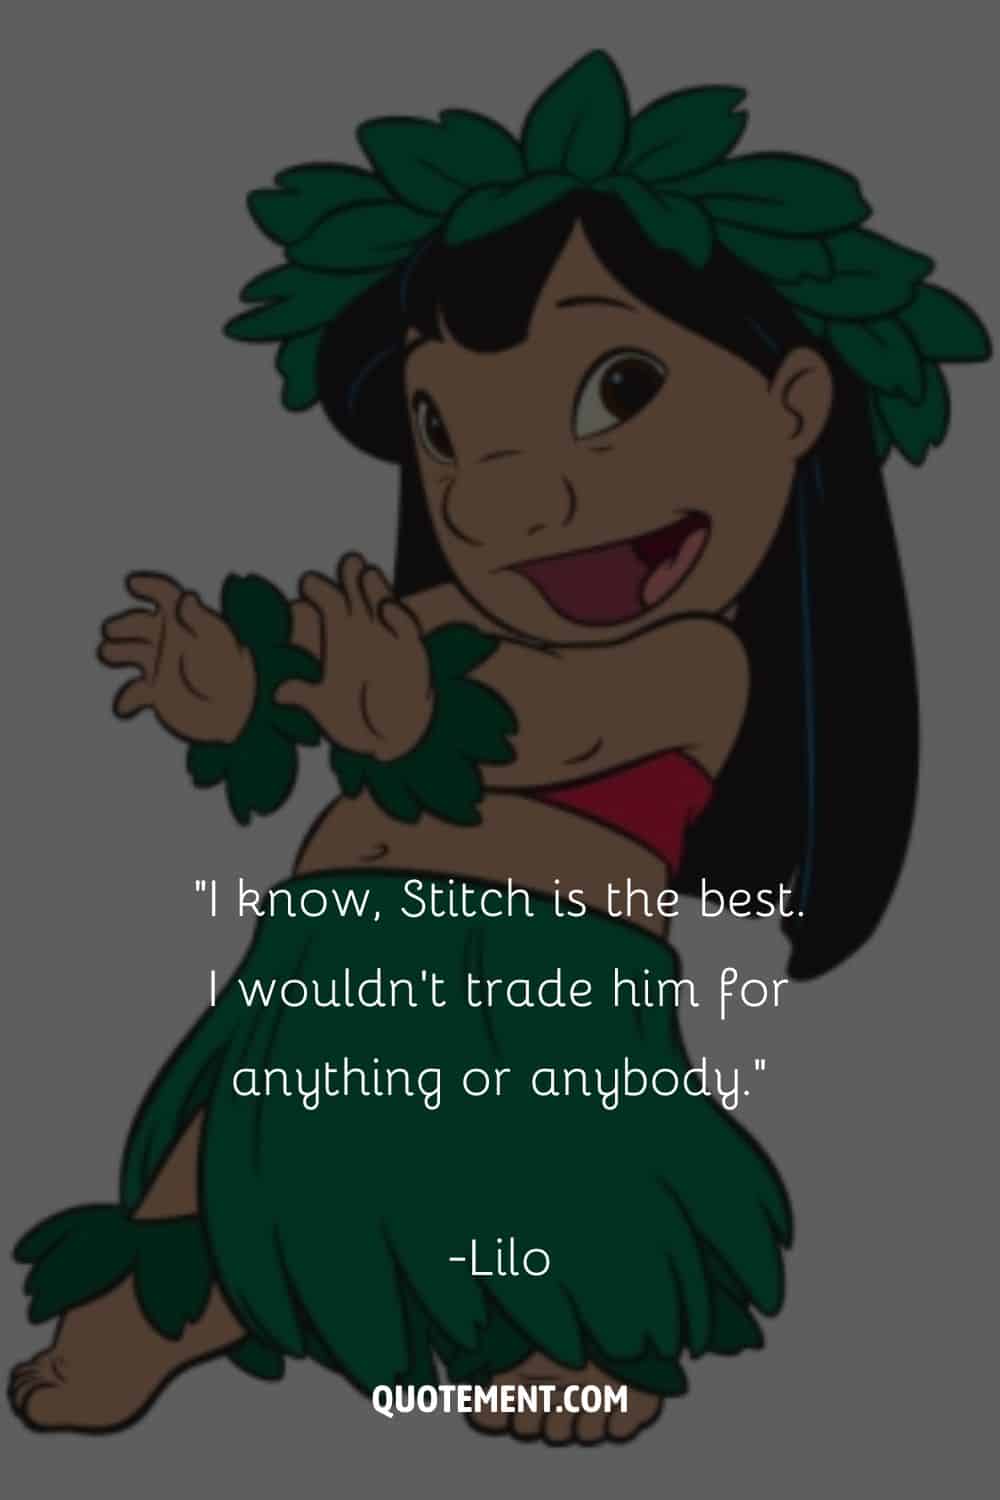 Lilo dancing in a green outfit representing the best Lilo & Stitch quote